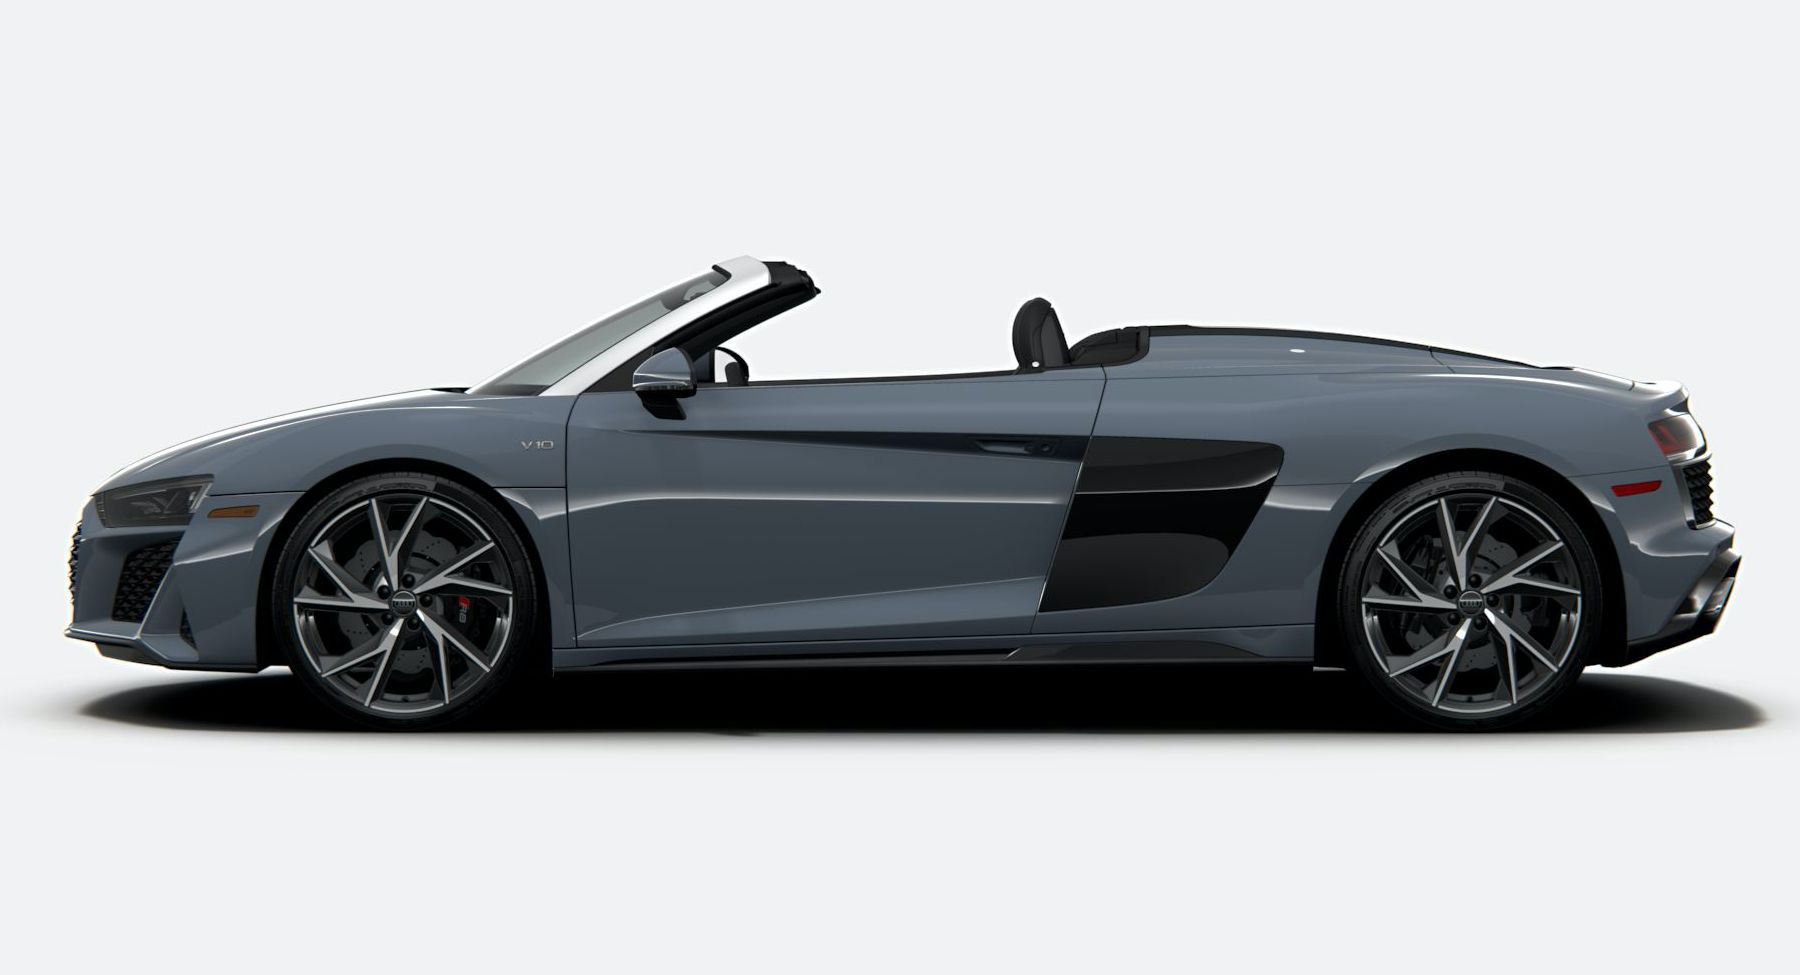 2021 Audi R8 V10 RWD Joins U.S. Lineup As The Cheapest Model At $145,895 |  Carscoops